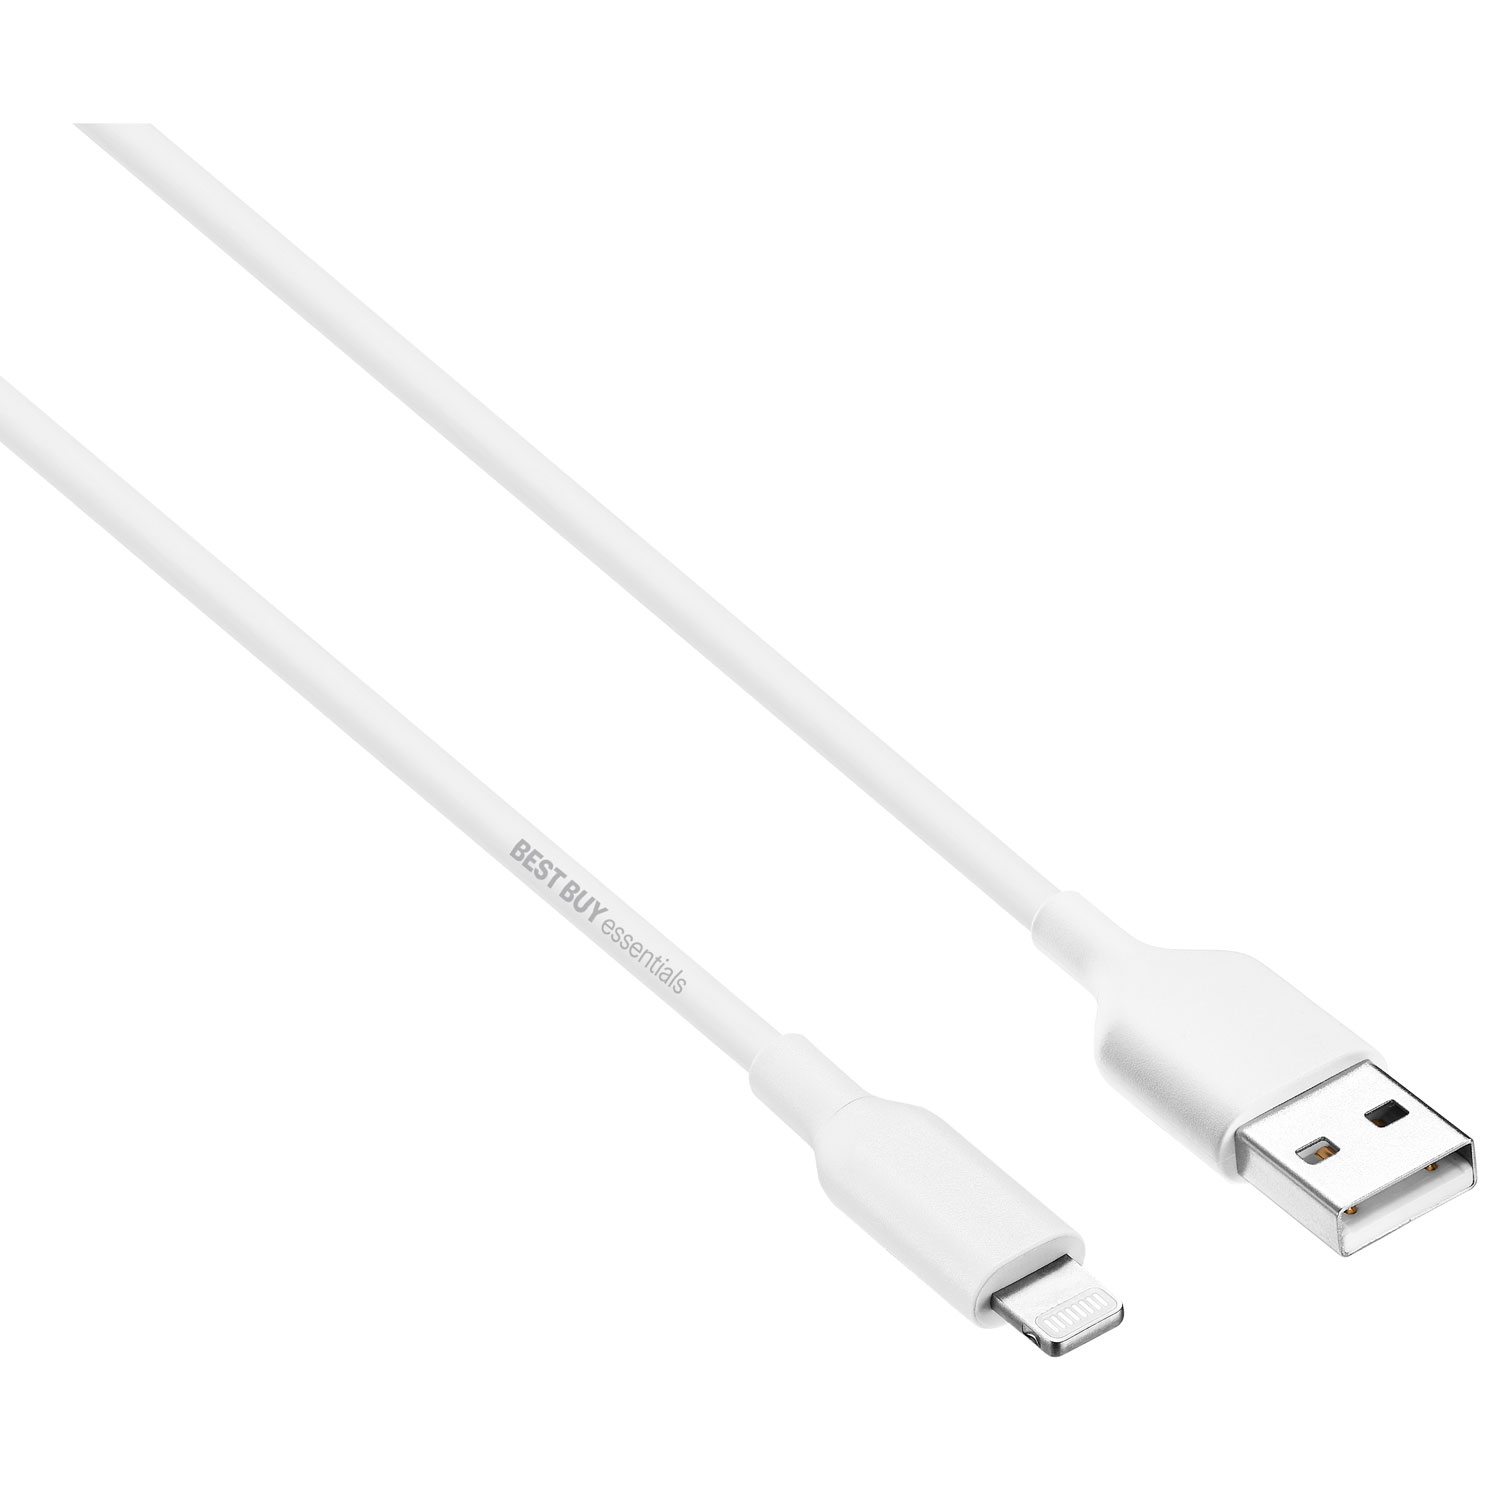 Best Buy Essentials 1m (3 ft.) Lightning to USB Cable